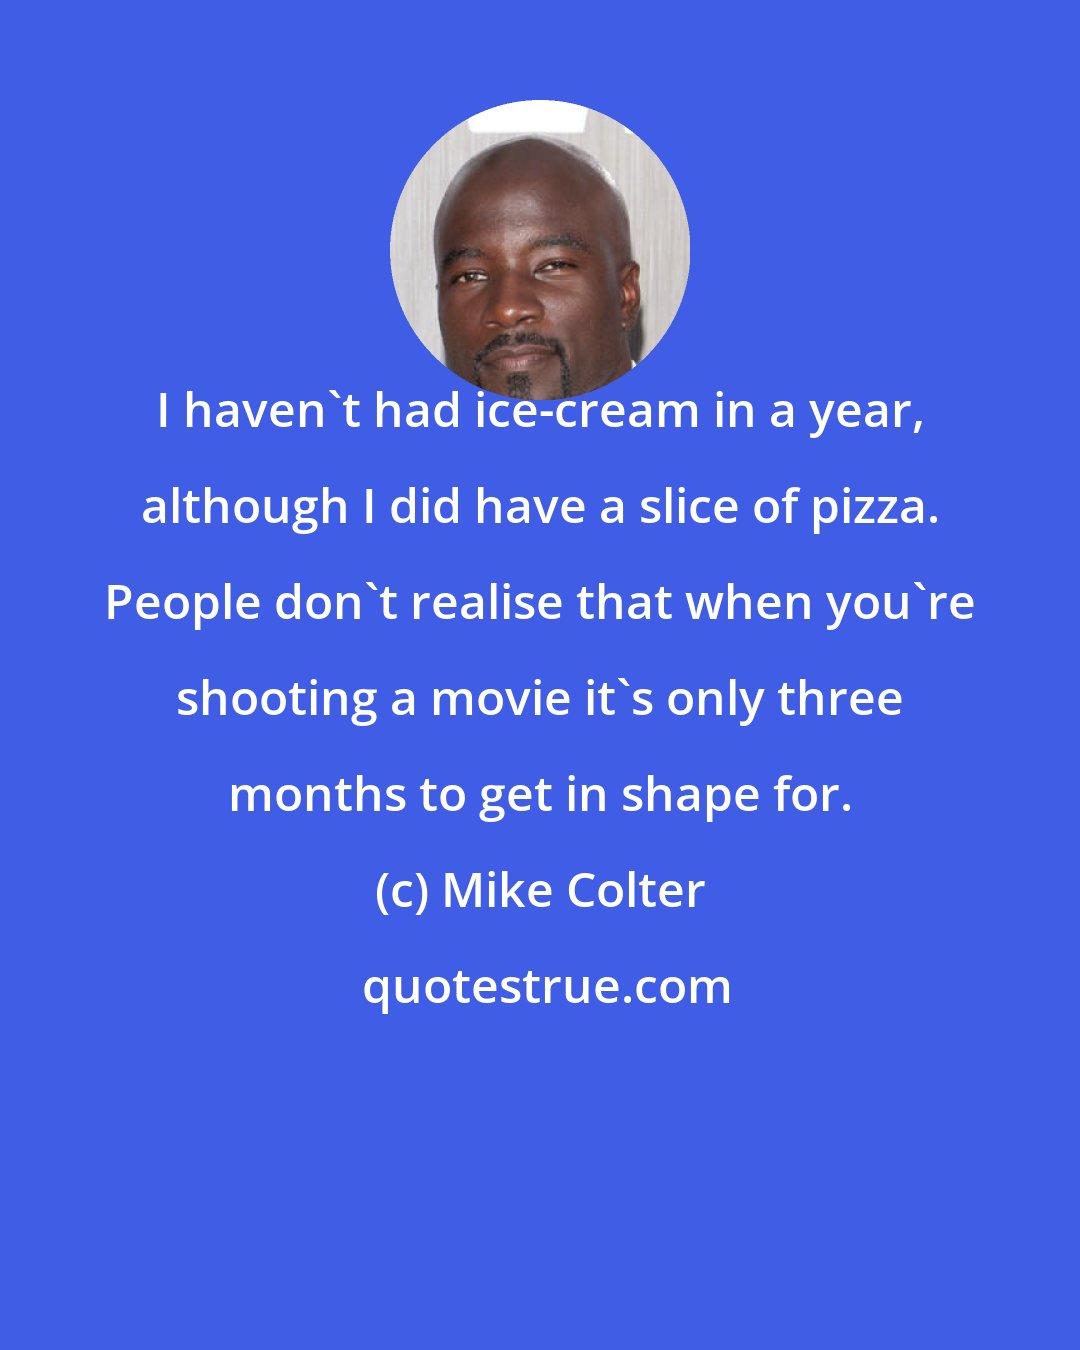 Mike Colter: I haven't had ice-cream in a year, although I did have a slice of pizza. People don't realise that when you're shooting a movie it's only three months to get in shape for.